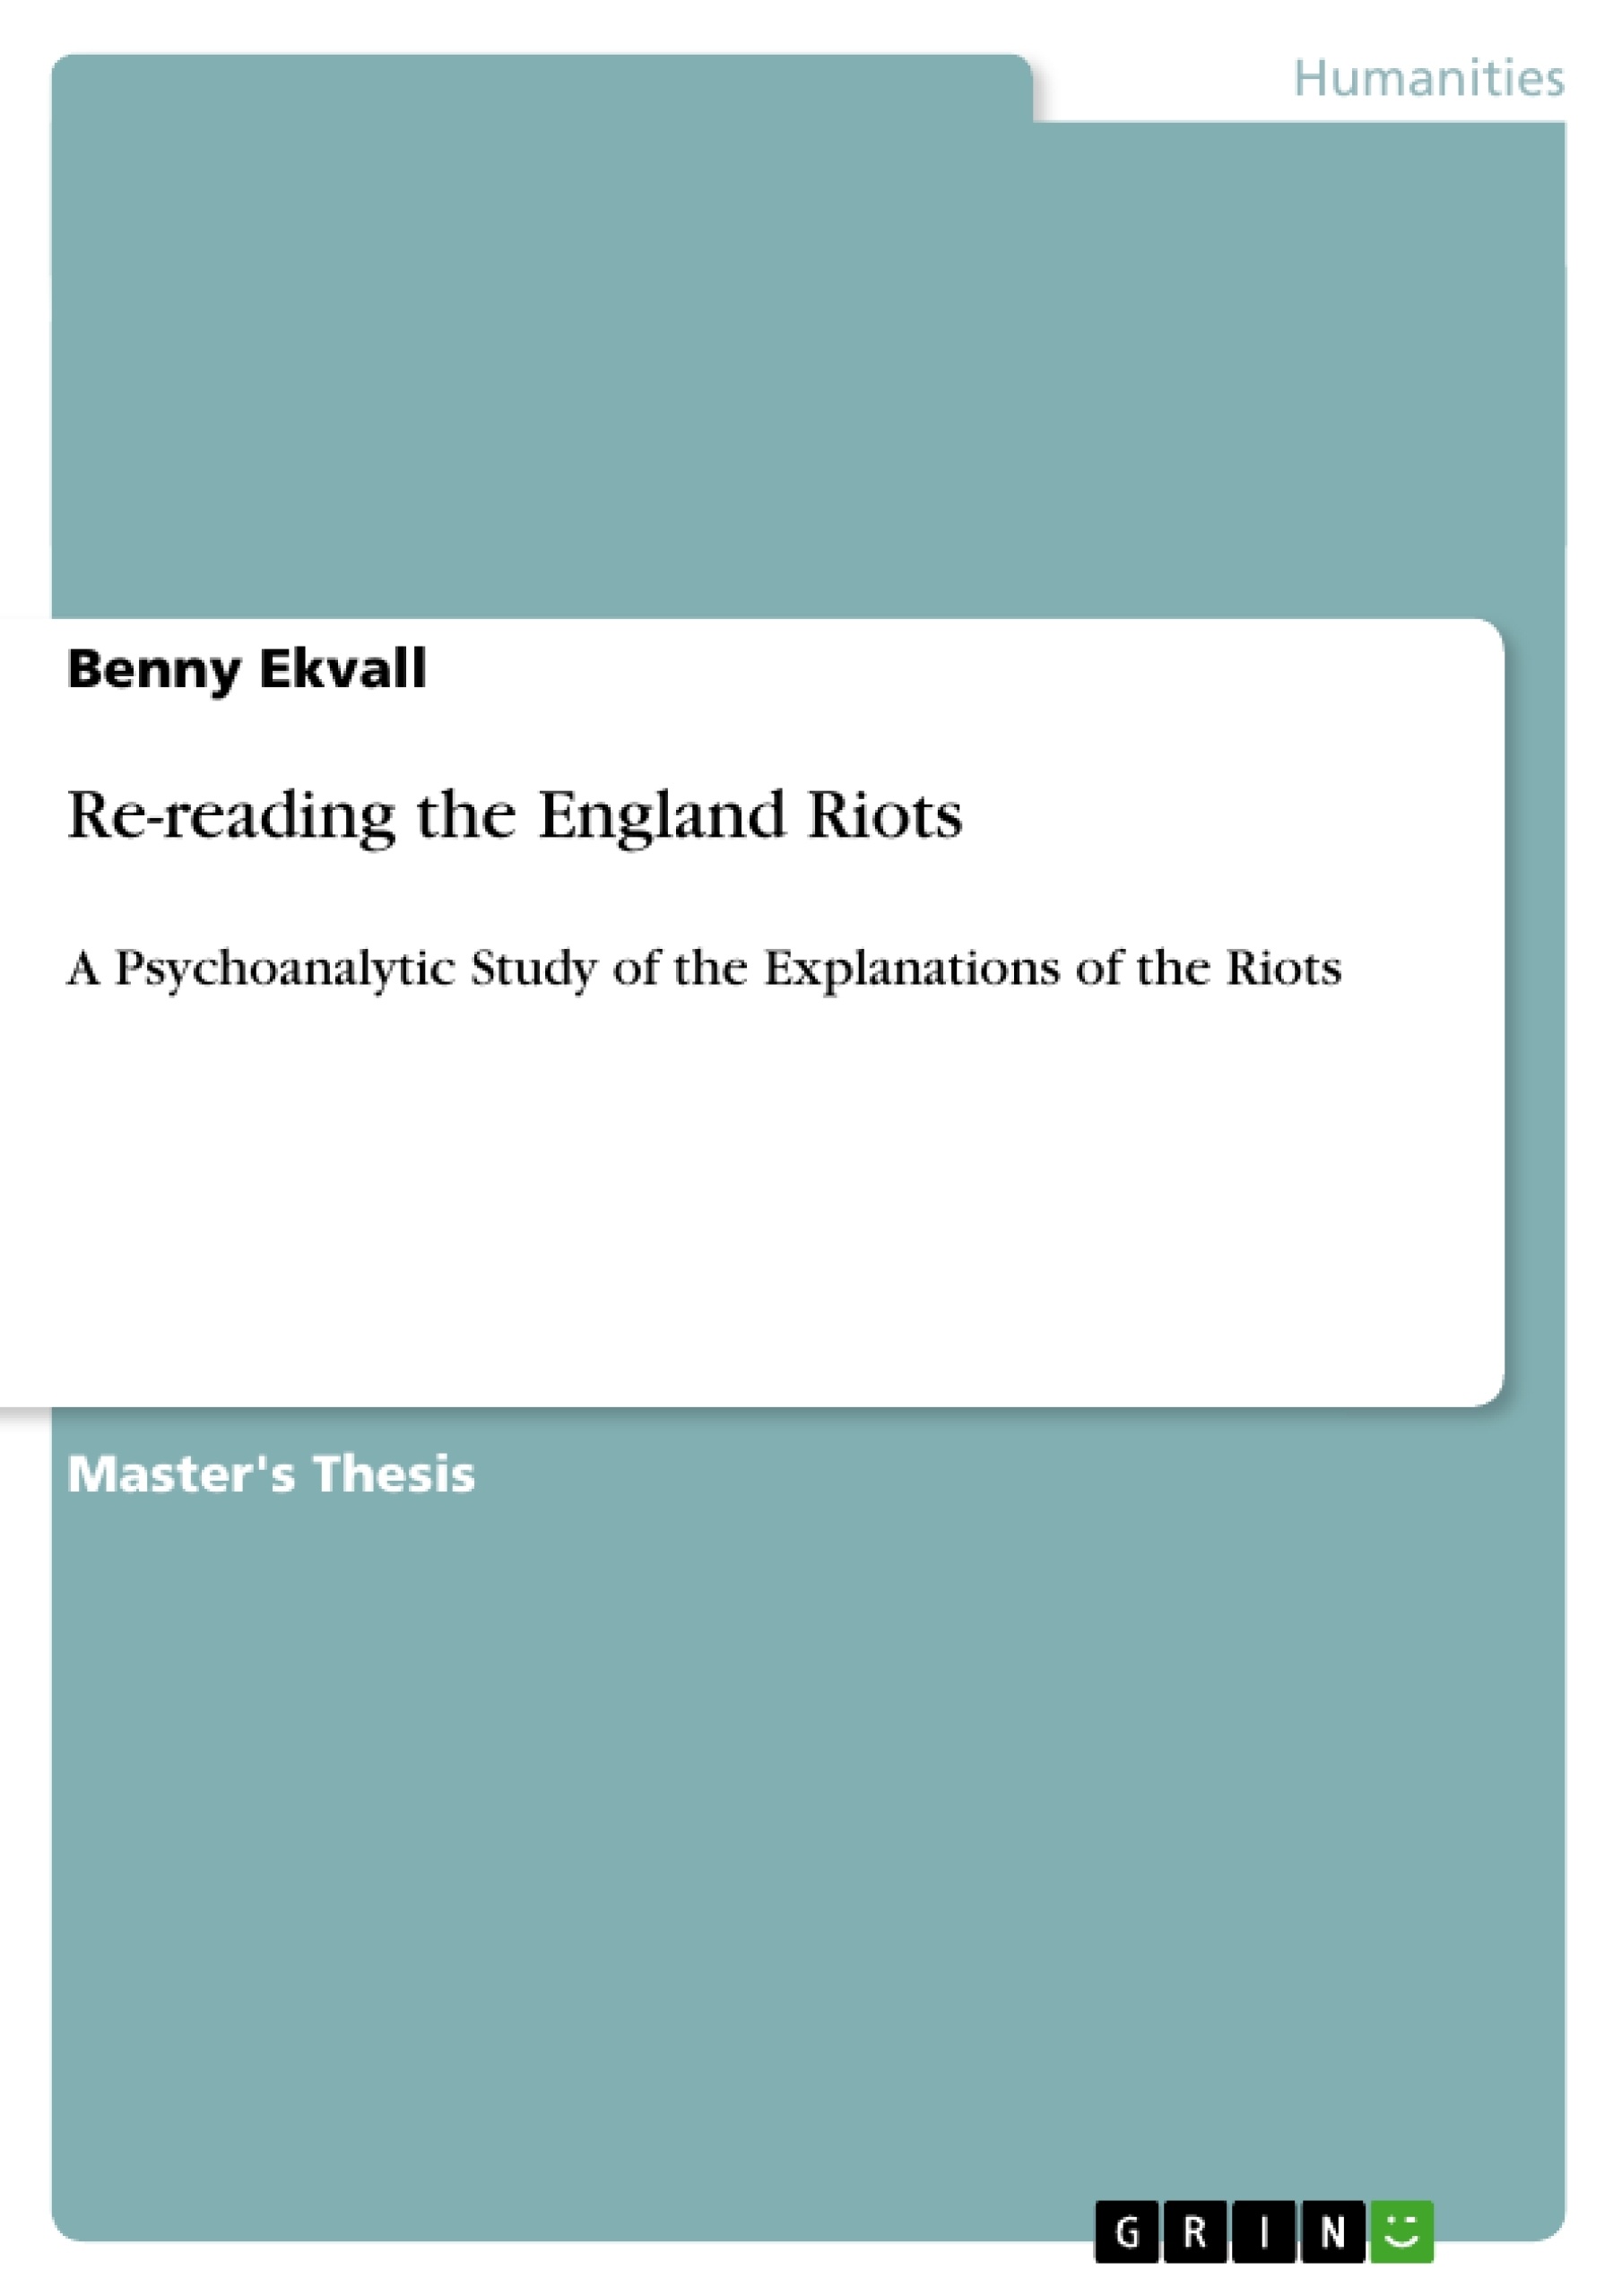 Title: Re-reading the England Riots